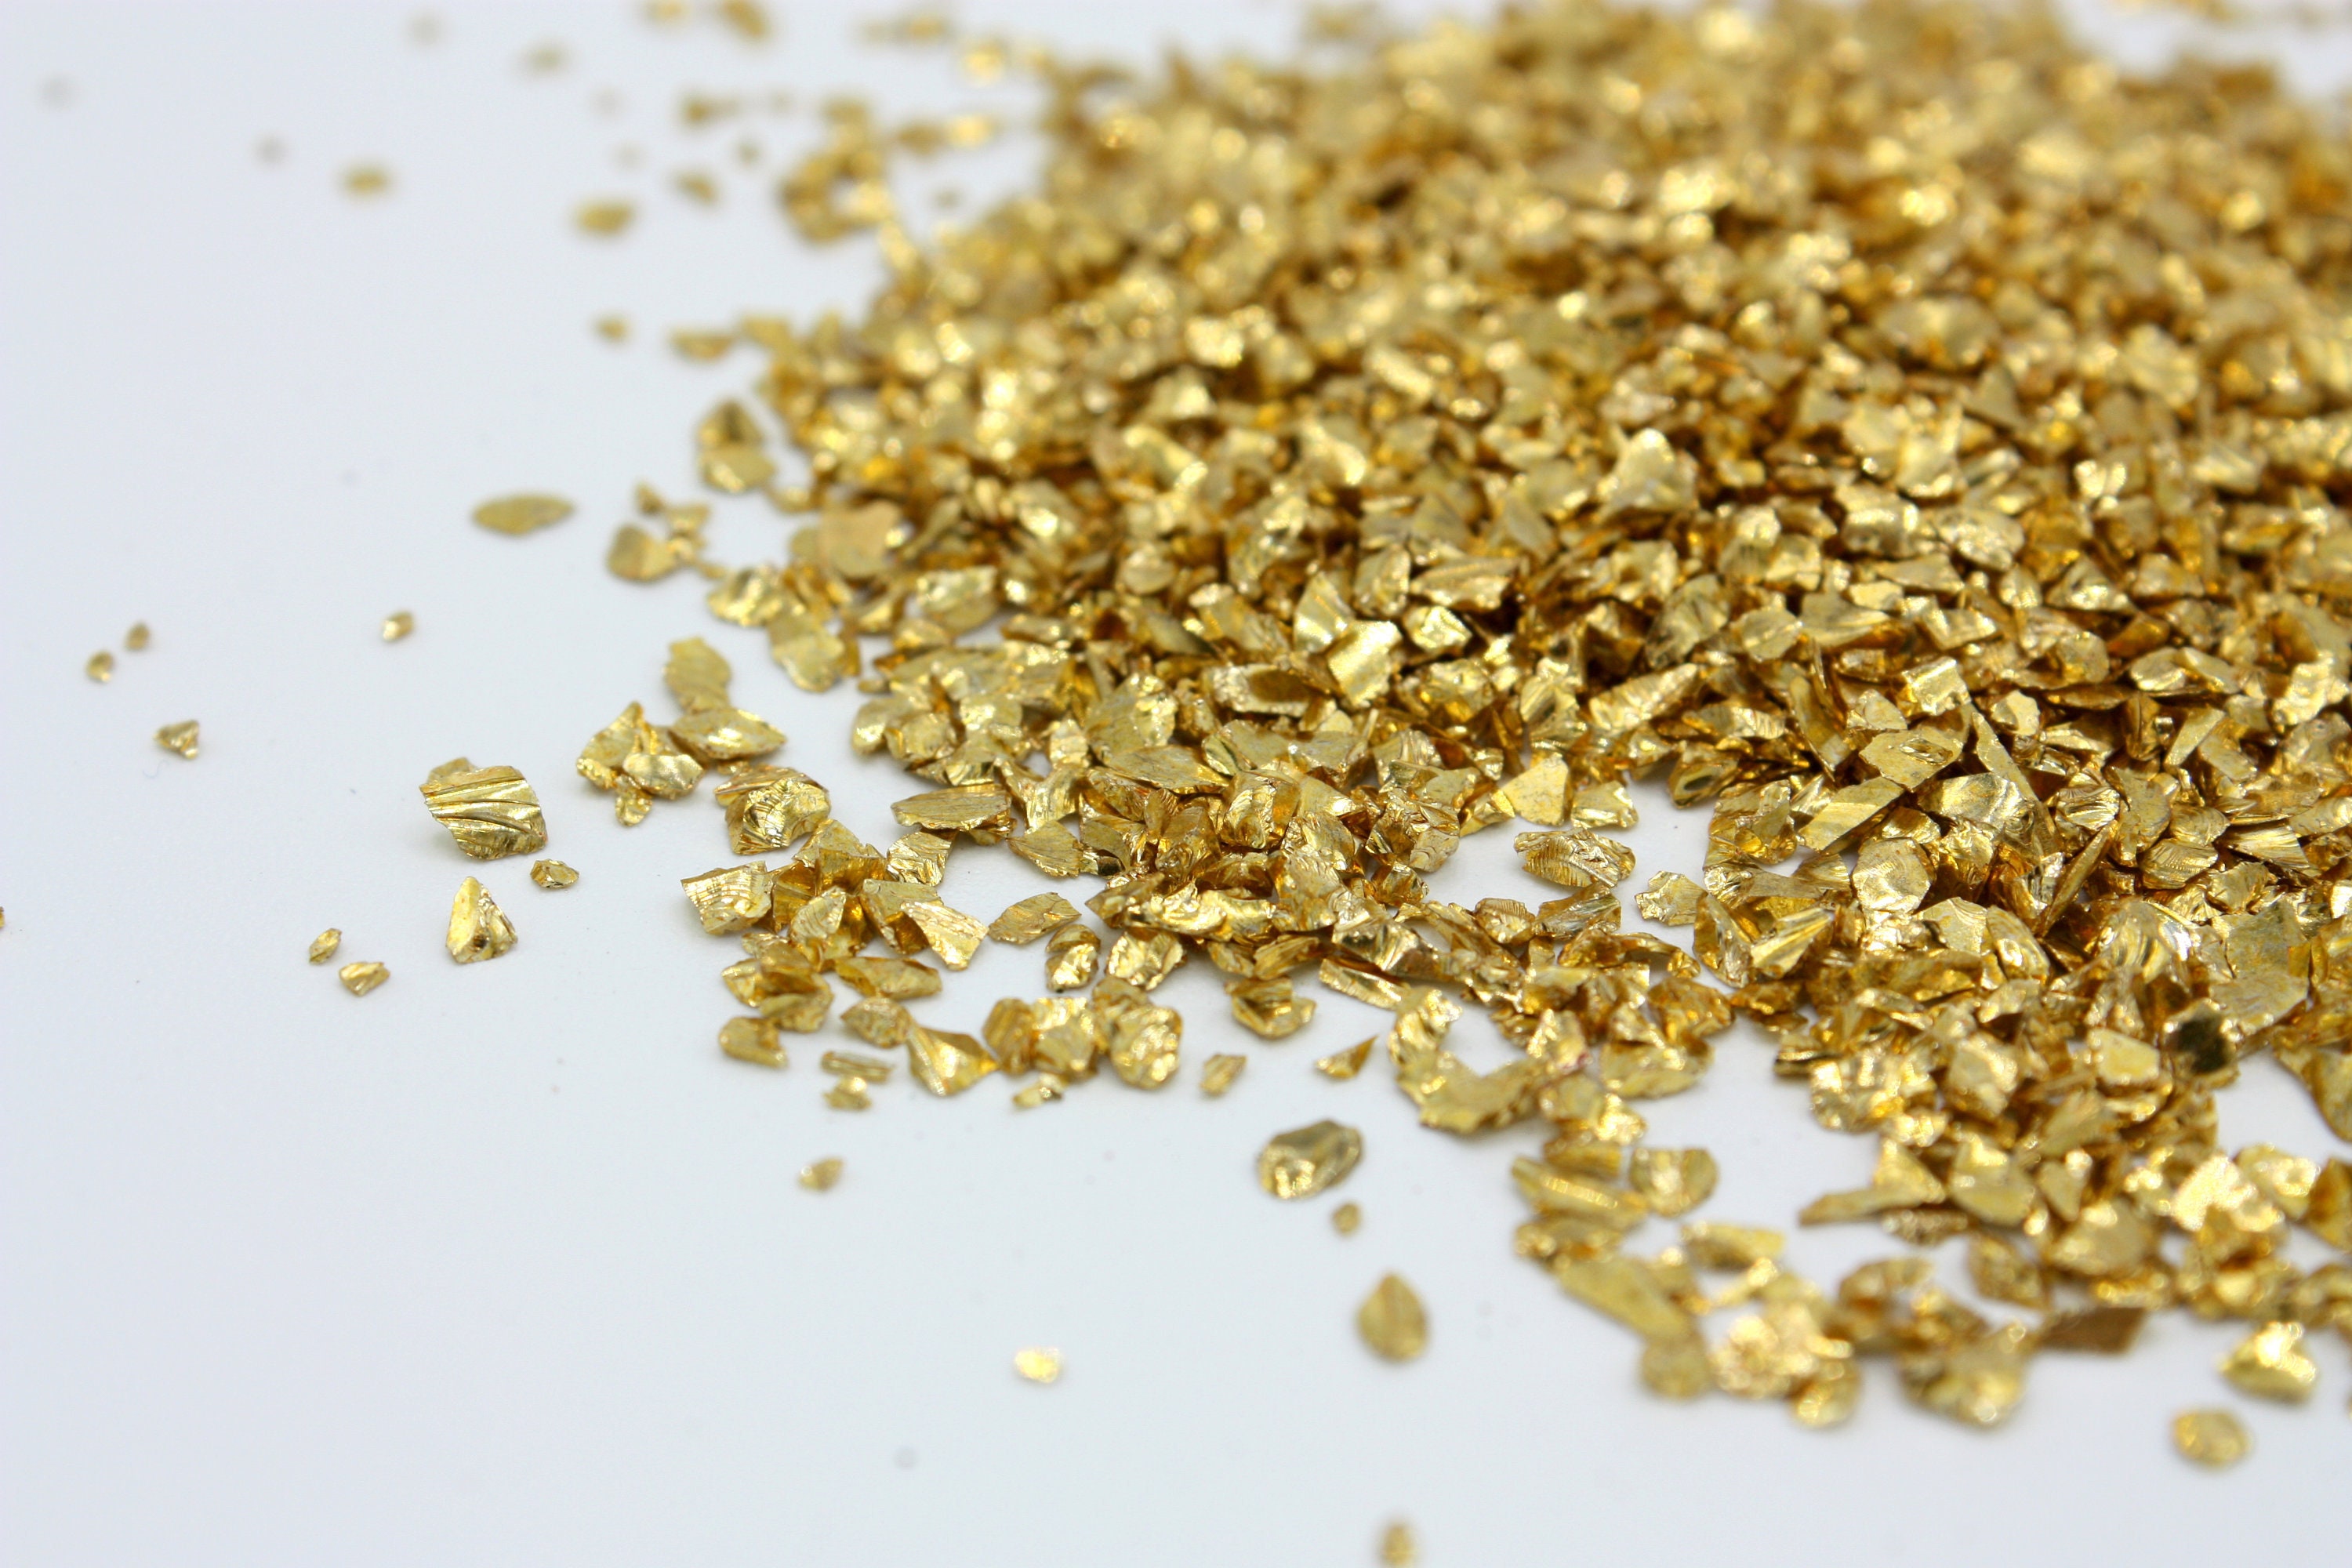 Gold Crushed Glass for Art, for Crafting, Glass Pieces for Mosaics, Broken  Glass Pieces, Metallic Glass for Resin Art, Resin Art Supplies 